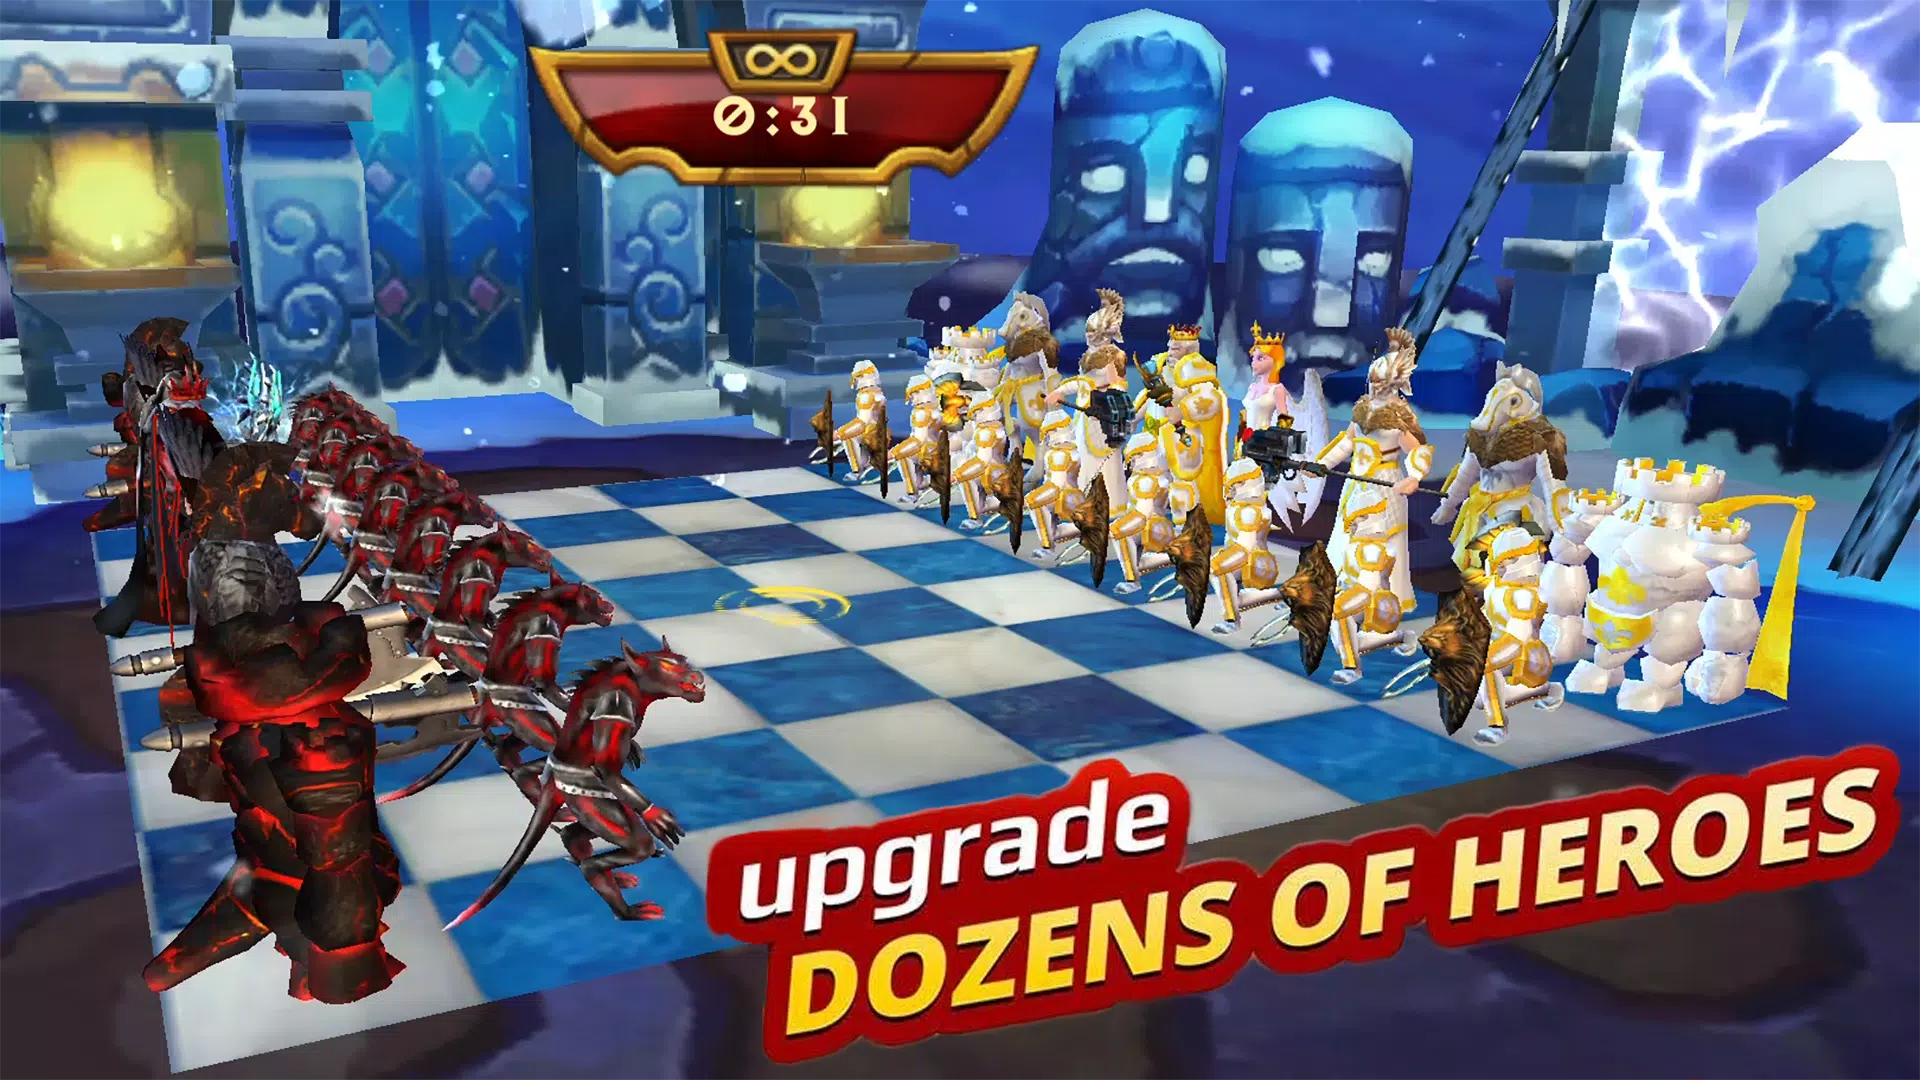 Chess - Clash of Kings 2.43.0 APK Download by CC Games - APKMirror